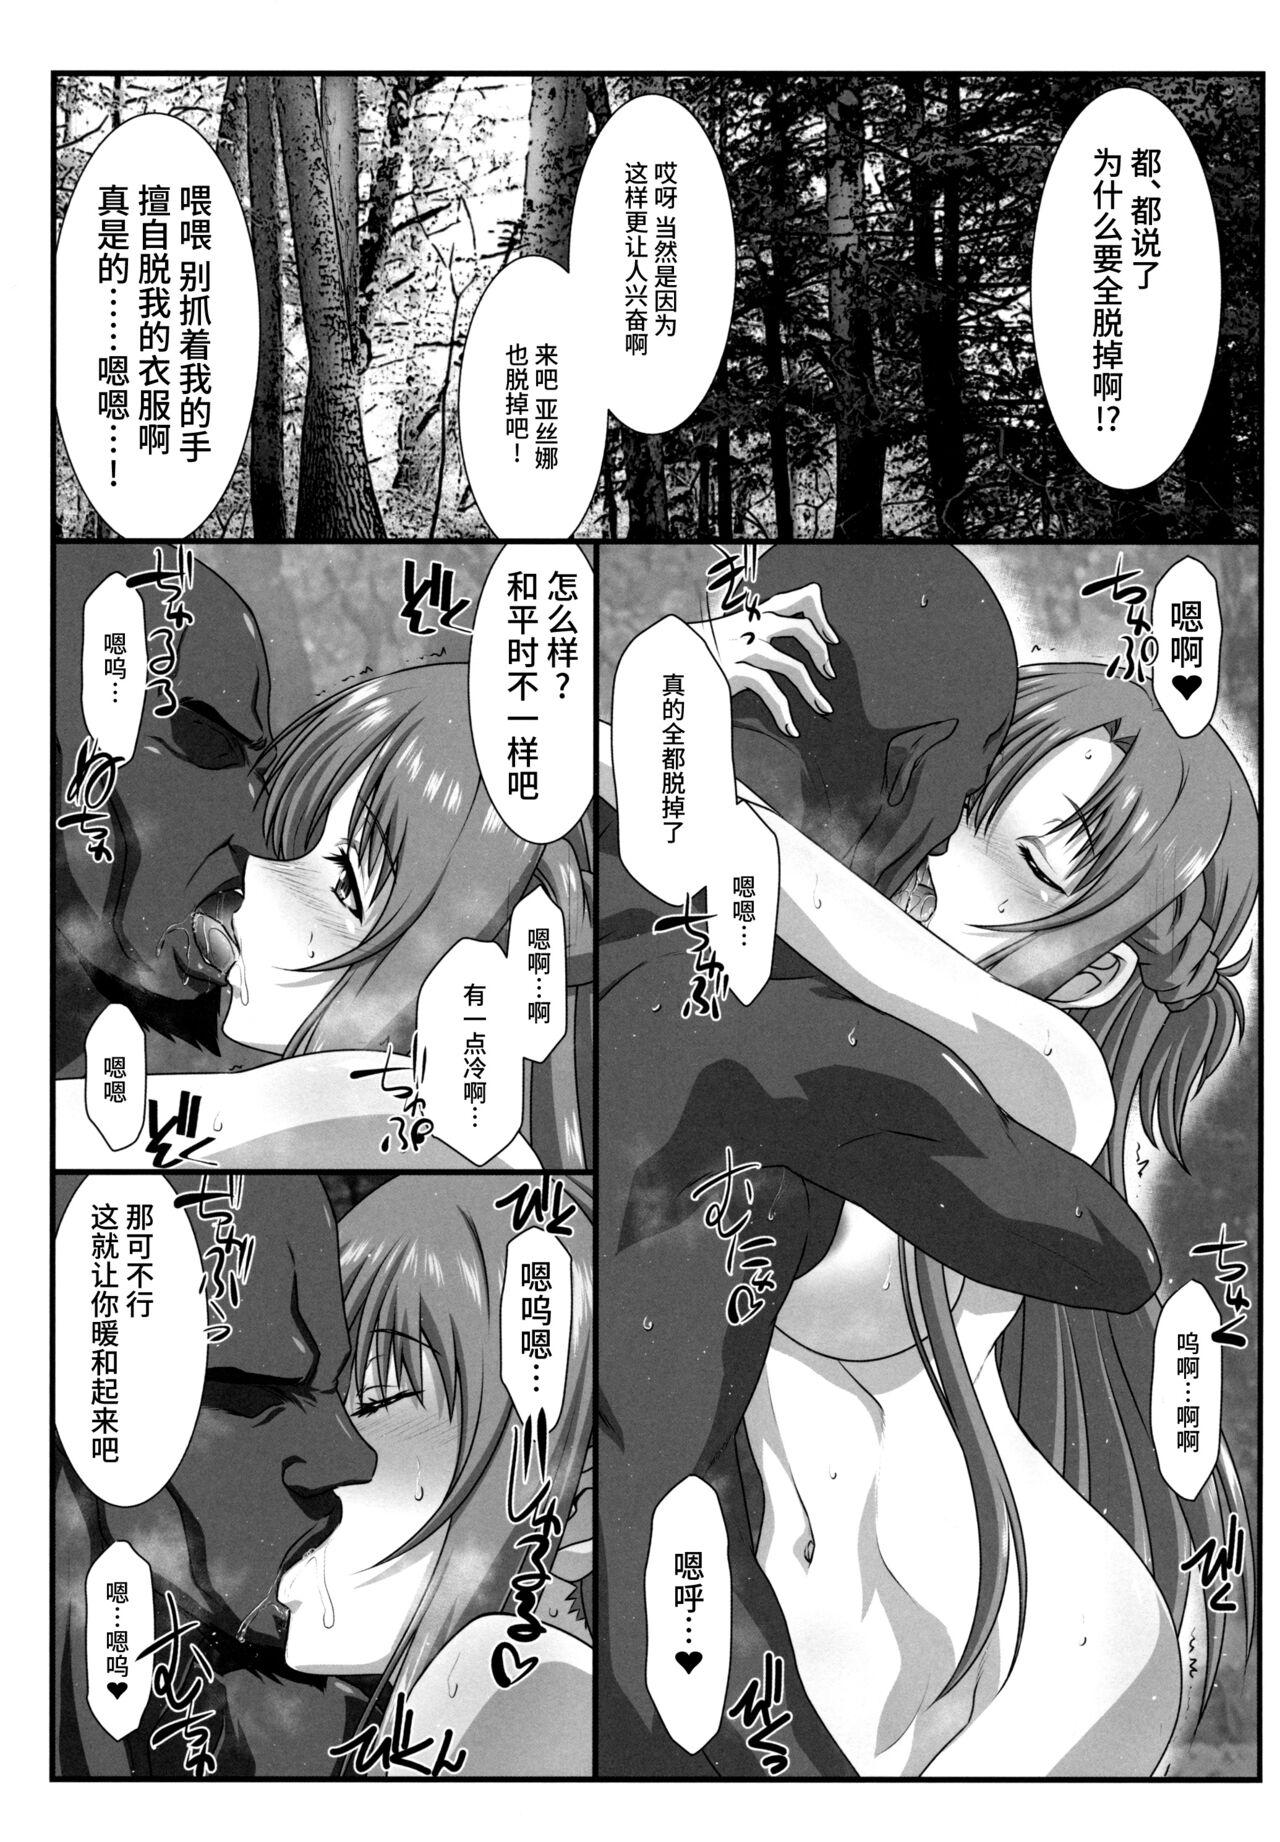 Pussy Play Astral Bout Ver. 45 - Sword art online Amazing - Page 4